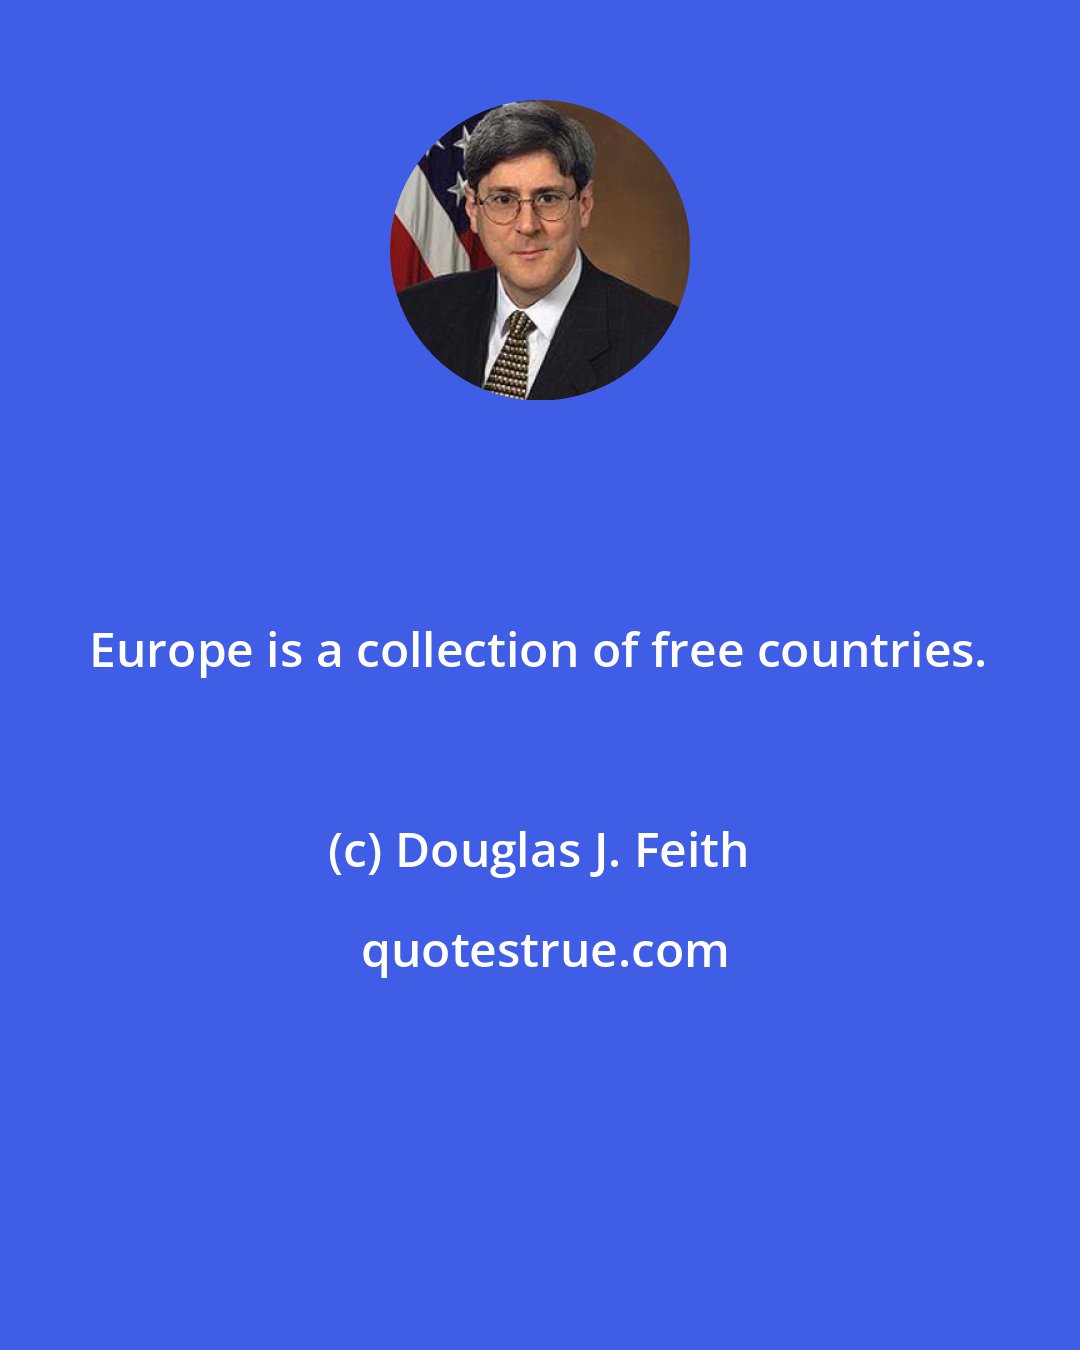 Douglas J. Feith: Europe is a collection of free countries.